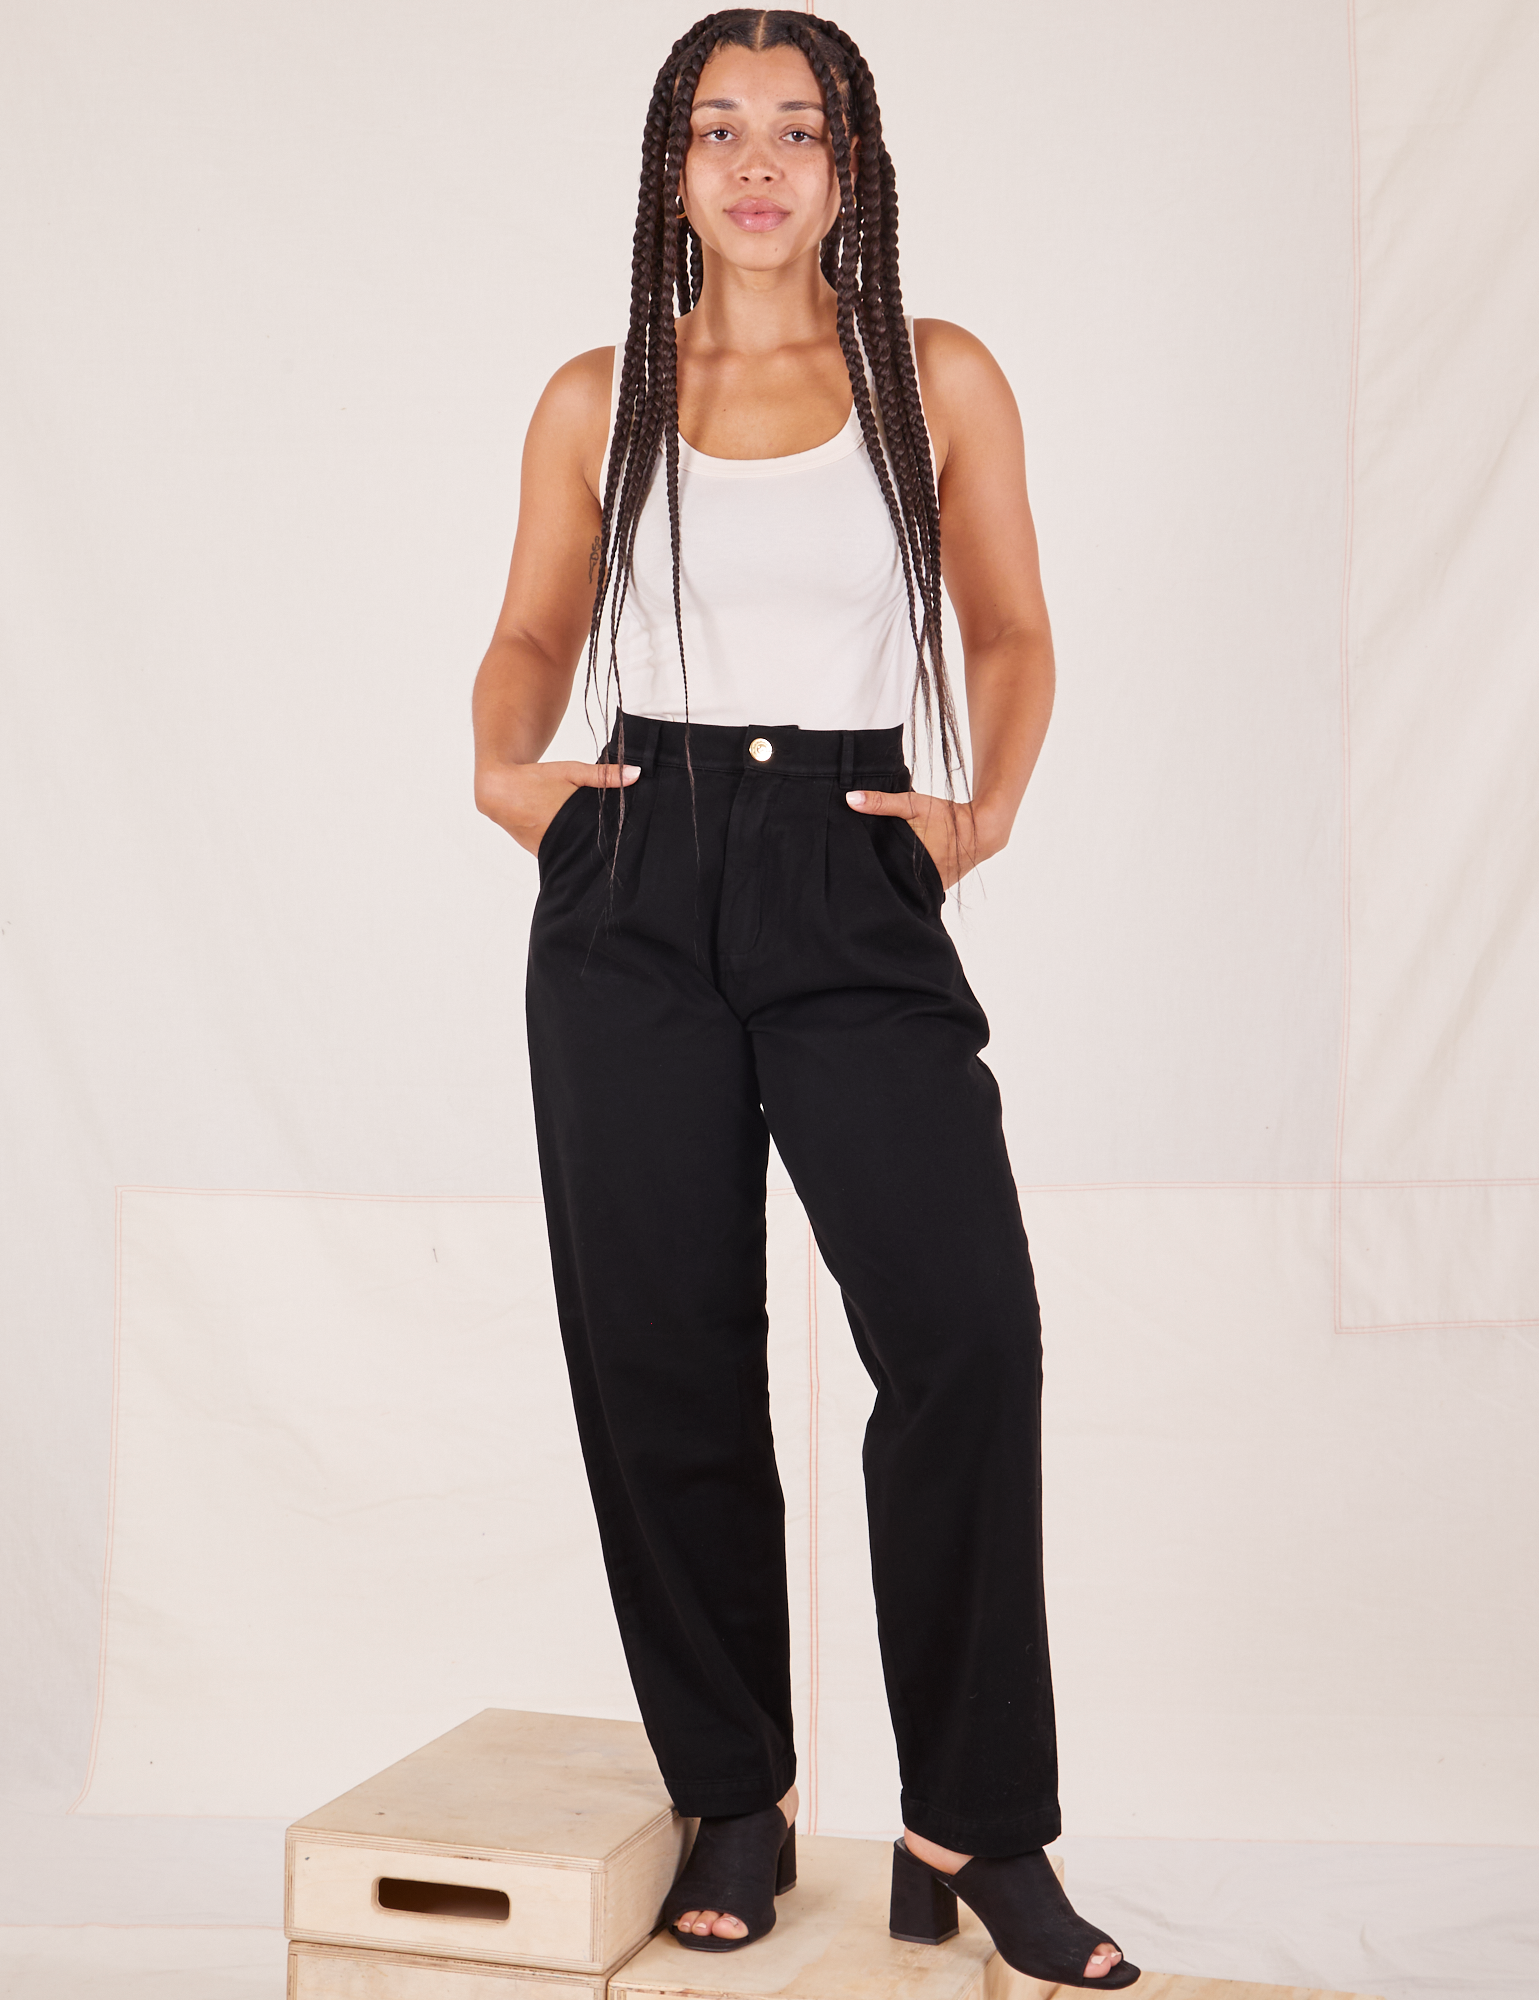 Gabi is 5&#39;7&quot; and wearing XXS Organic Trousers in Basic Black paired with Tank Top in vintage tee off-white